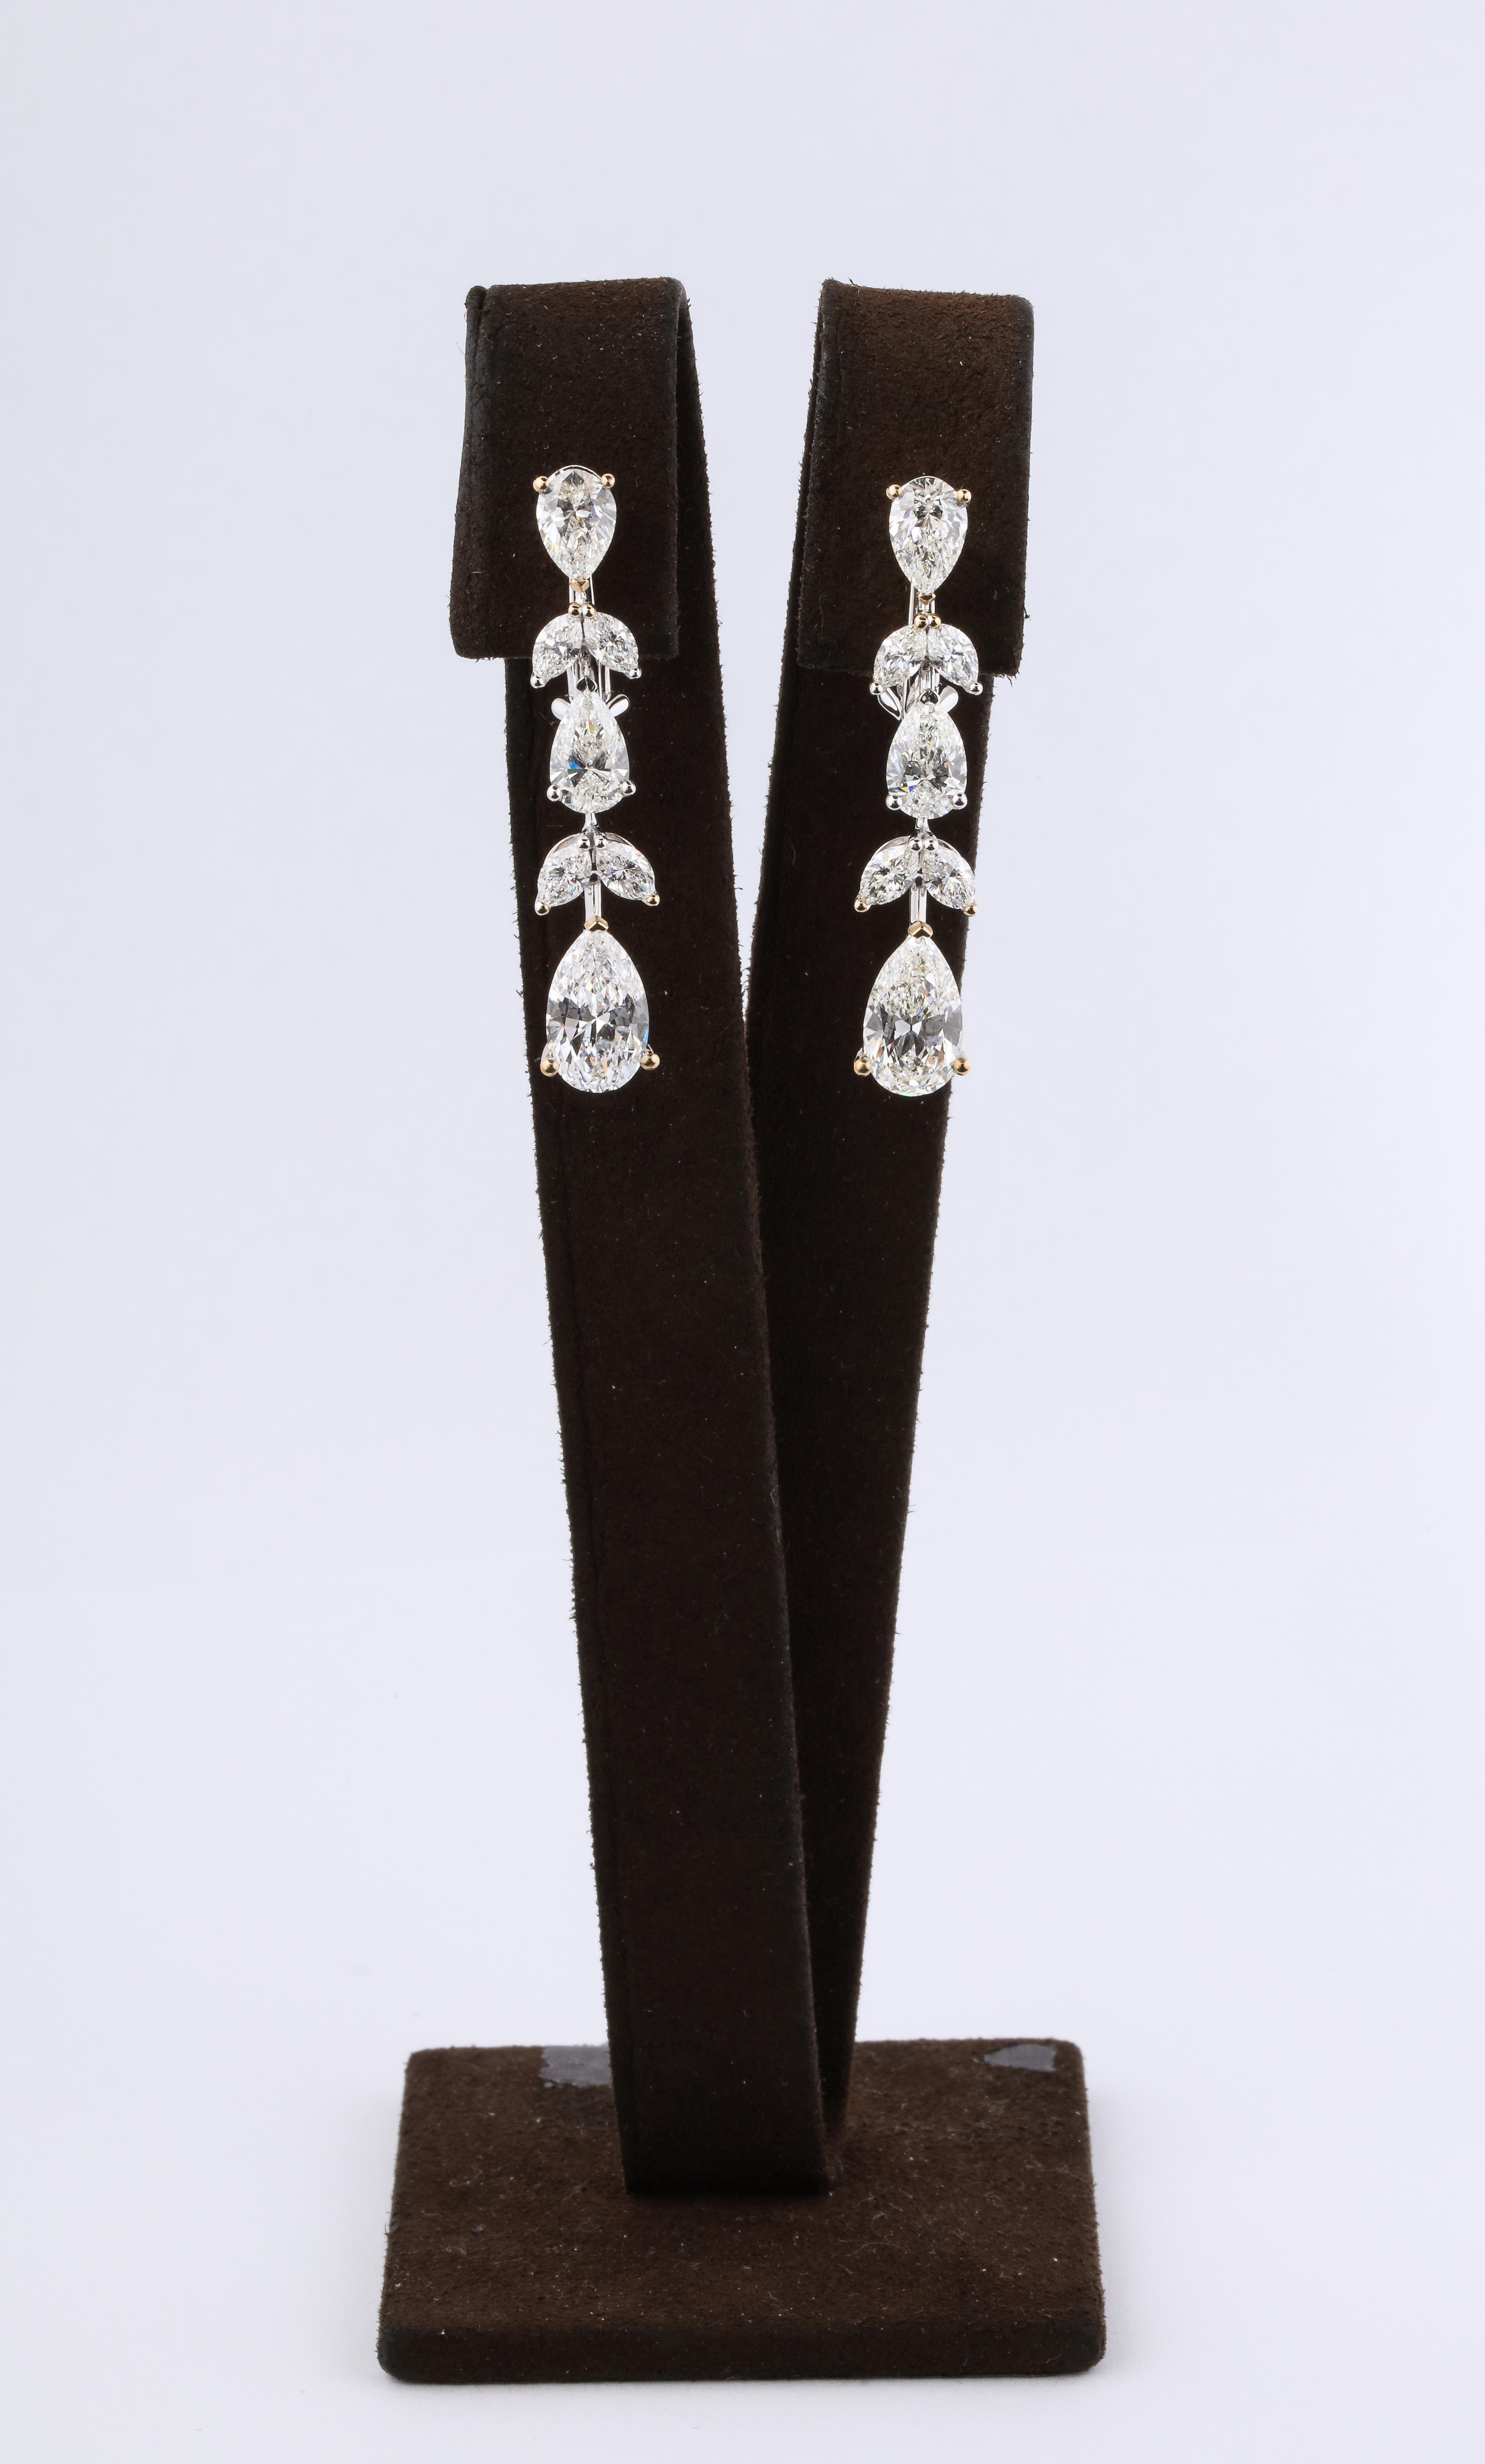 
A timeless Diamond Dangle Earring

5.44 carats of white pear shape and marquise cut diamonds + a pair of 4.01 carat white pear shape drops for a total diamond weight of 9.45 cts. 

Approximately 1.65 inches long 

Set in 18k white gold 

